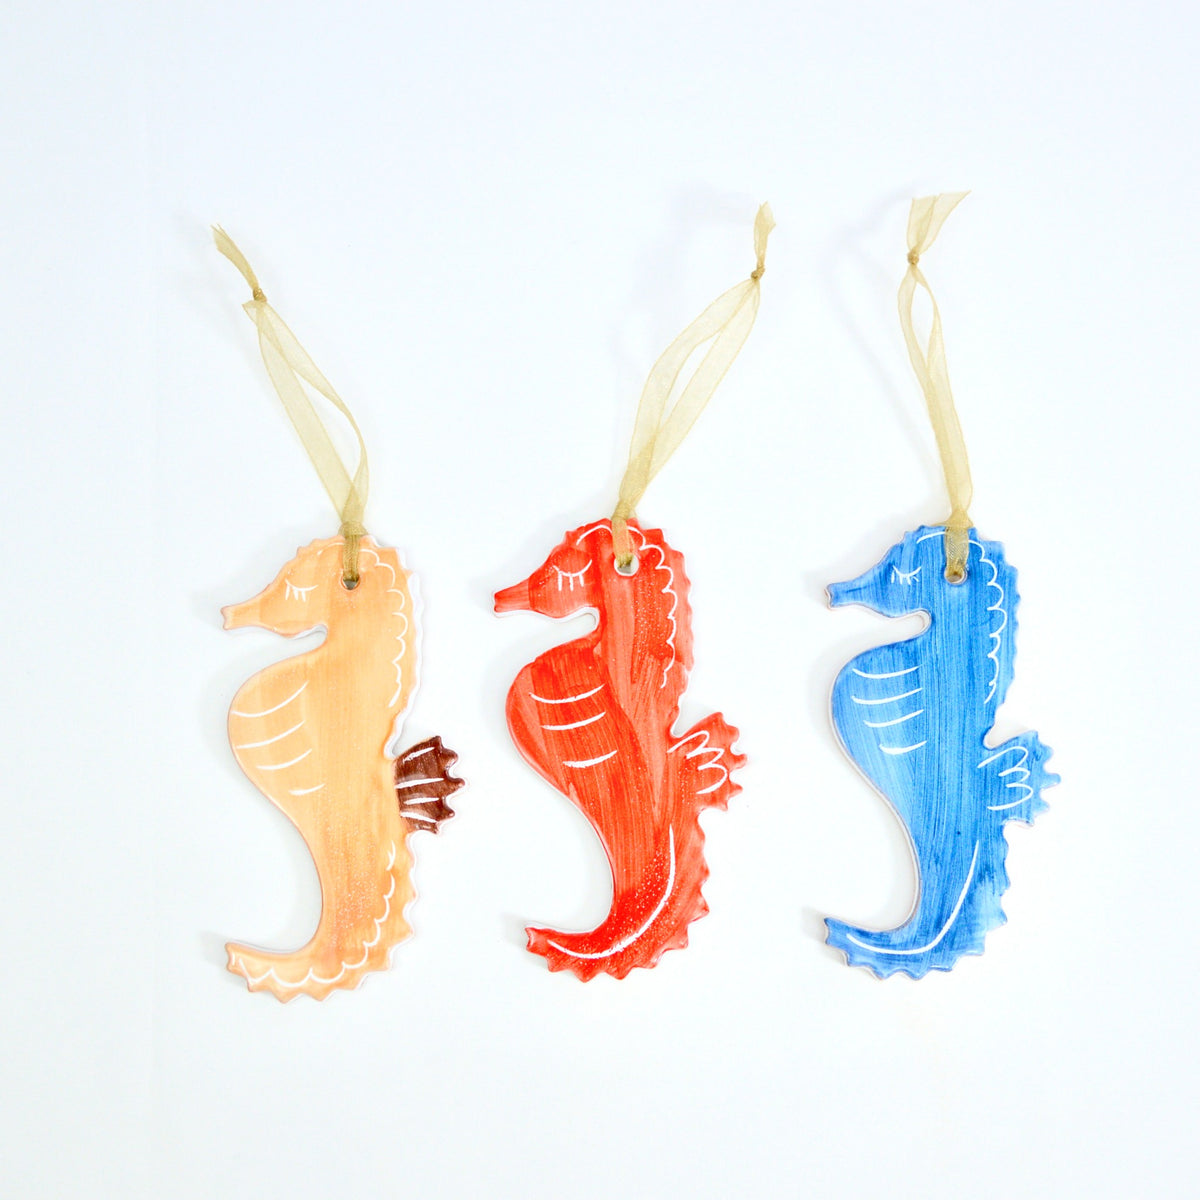 Tuscan Ceramic Seahorse Wall Plaques, Set of 3, Made in Italy - My Italian Decor